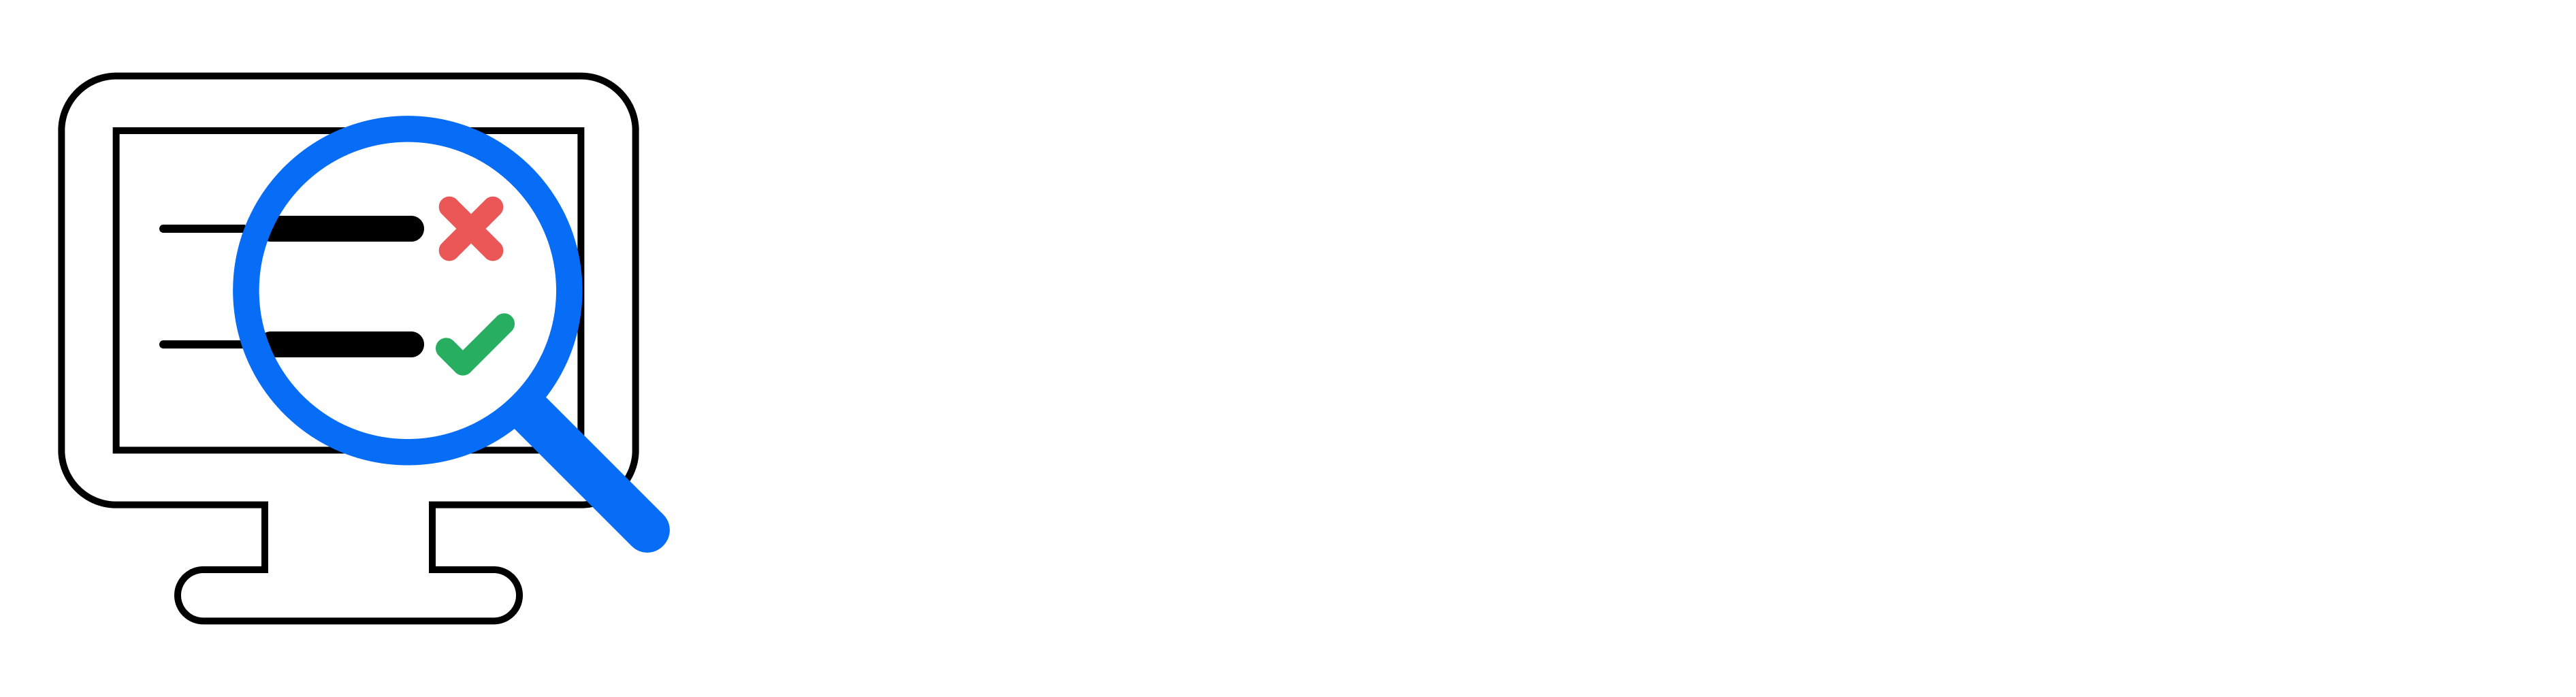 Dev Tester | Improve your test automation skills as a developer